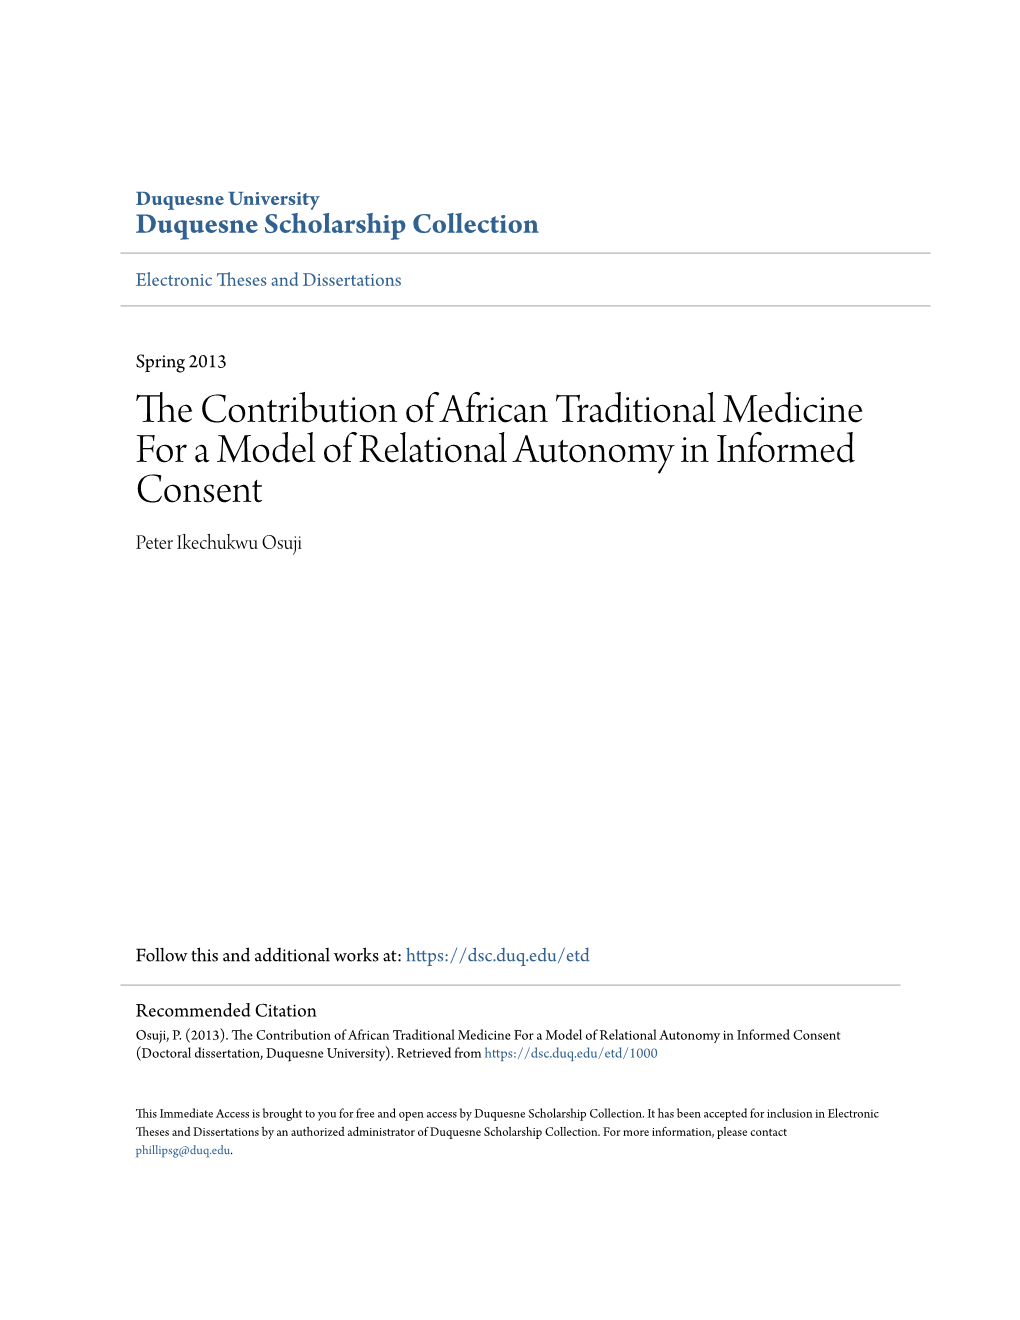 The Contribution of African Traditional Medicine for a Model of Relational